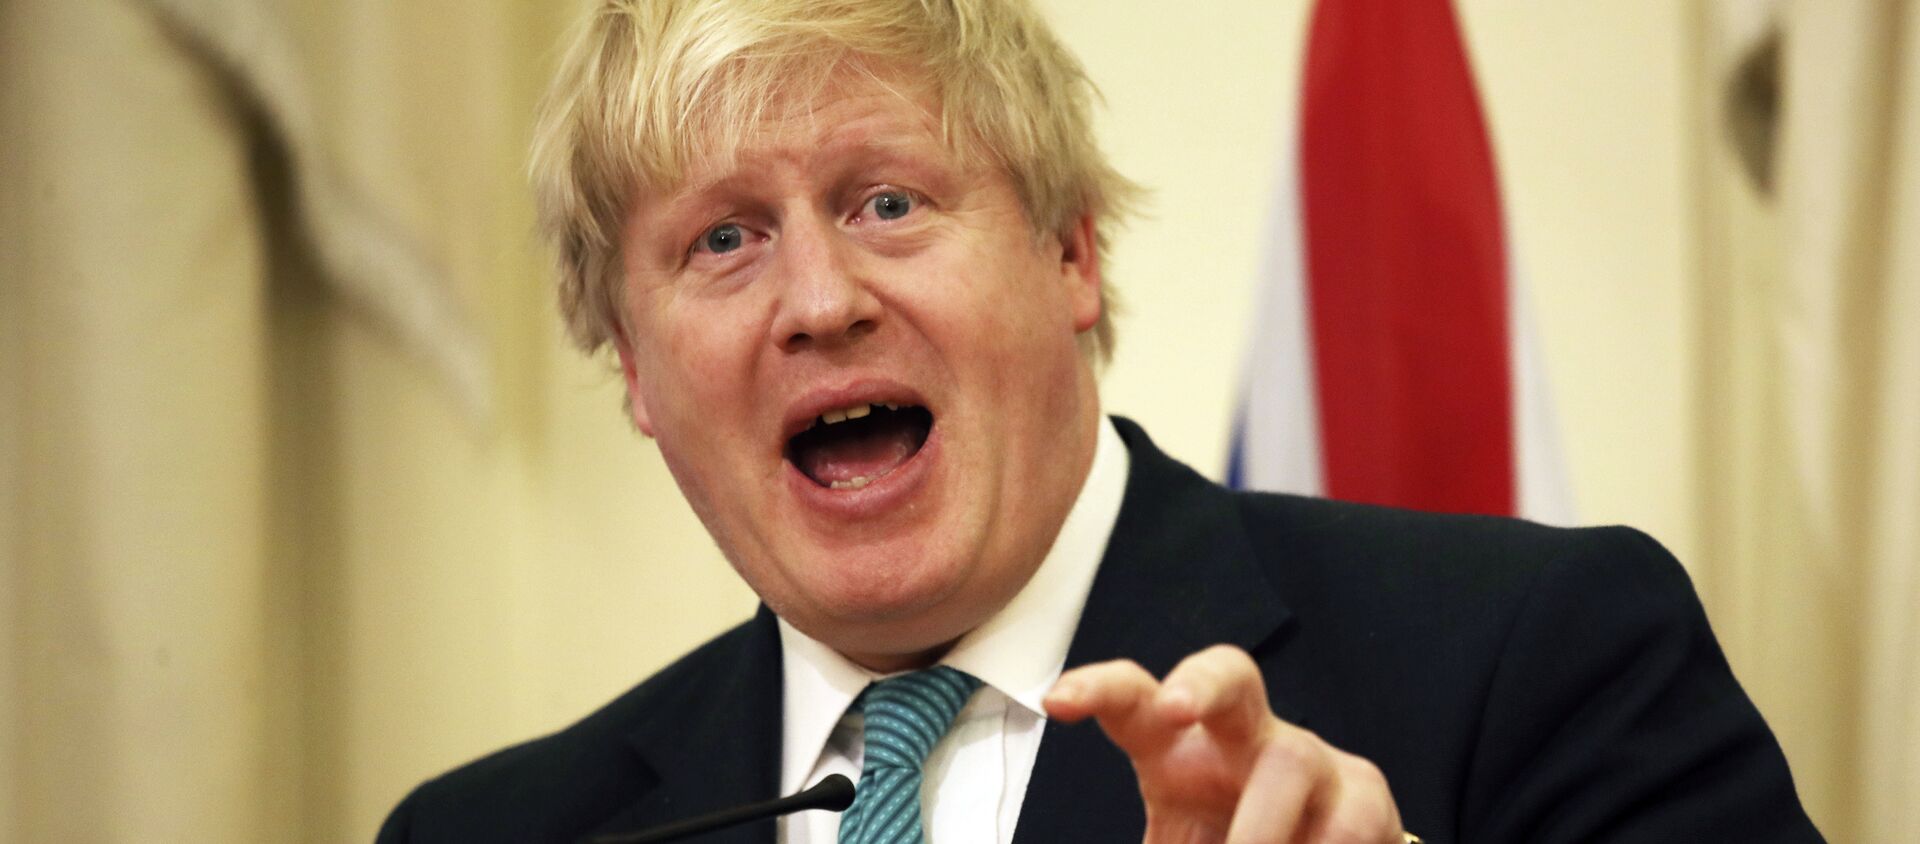 British Foreign Secretary Boris Johnson answers a question during a news conference after his meeting with Greek Foreign Minister Nikos Kotzias, in Athens on Thursday, April 6, 2017 - Sputnik International, 1920, 08.07.2018